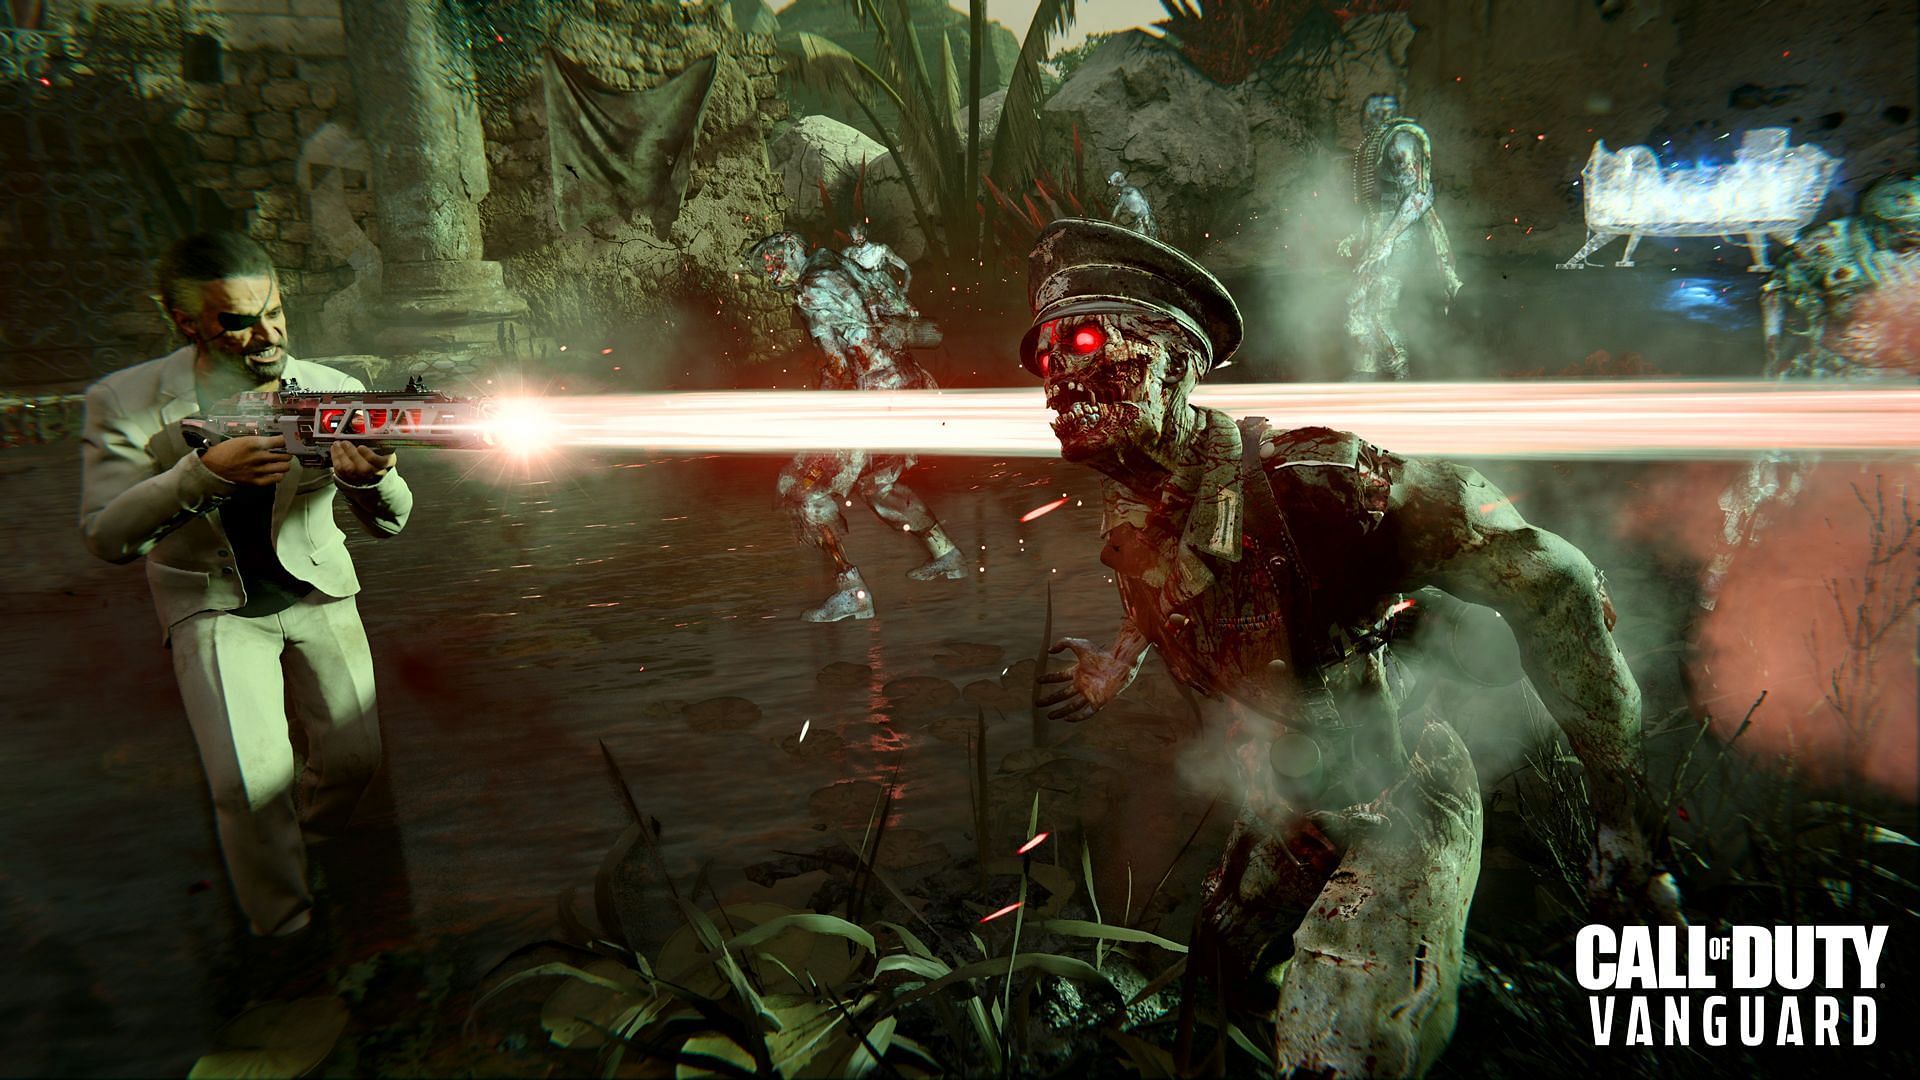 The EX1 assault rifle in action (Image via Activision)